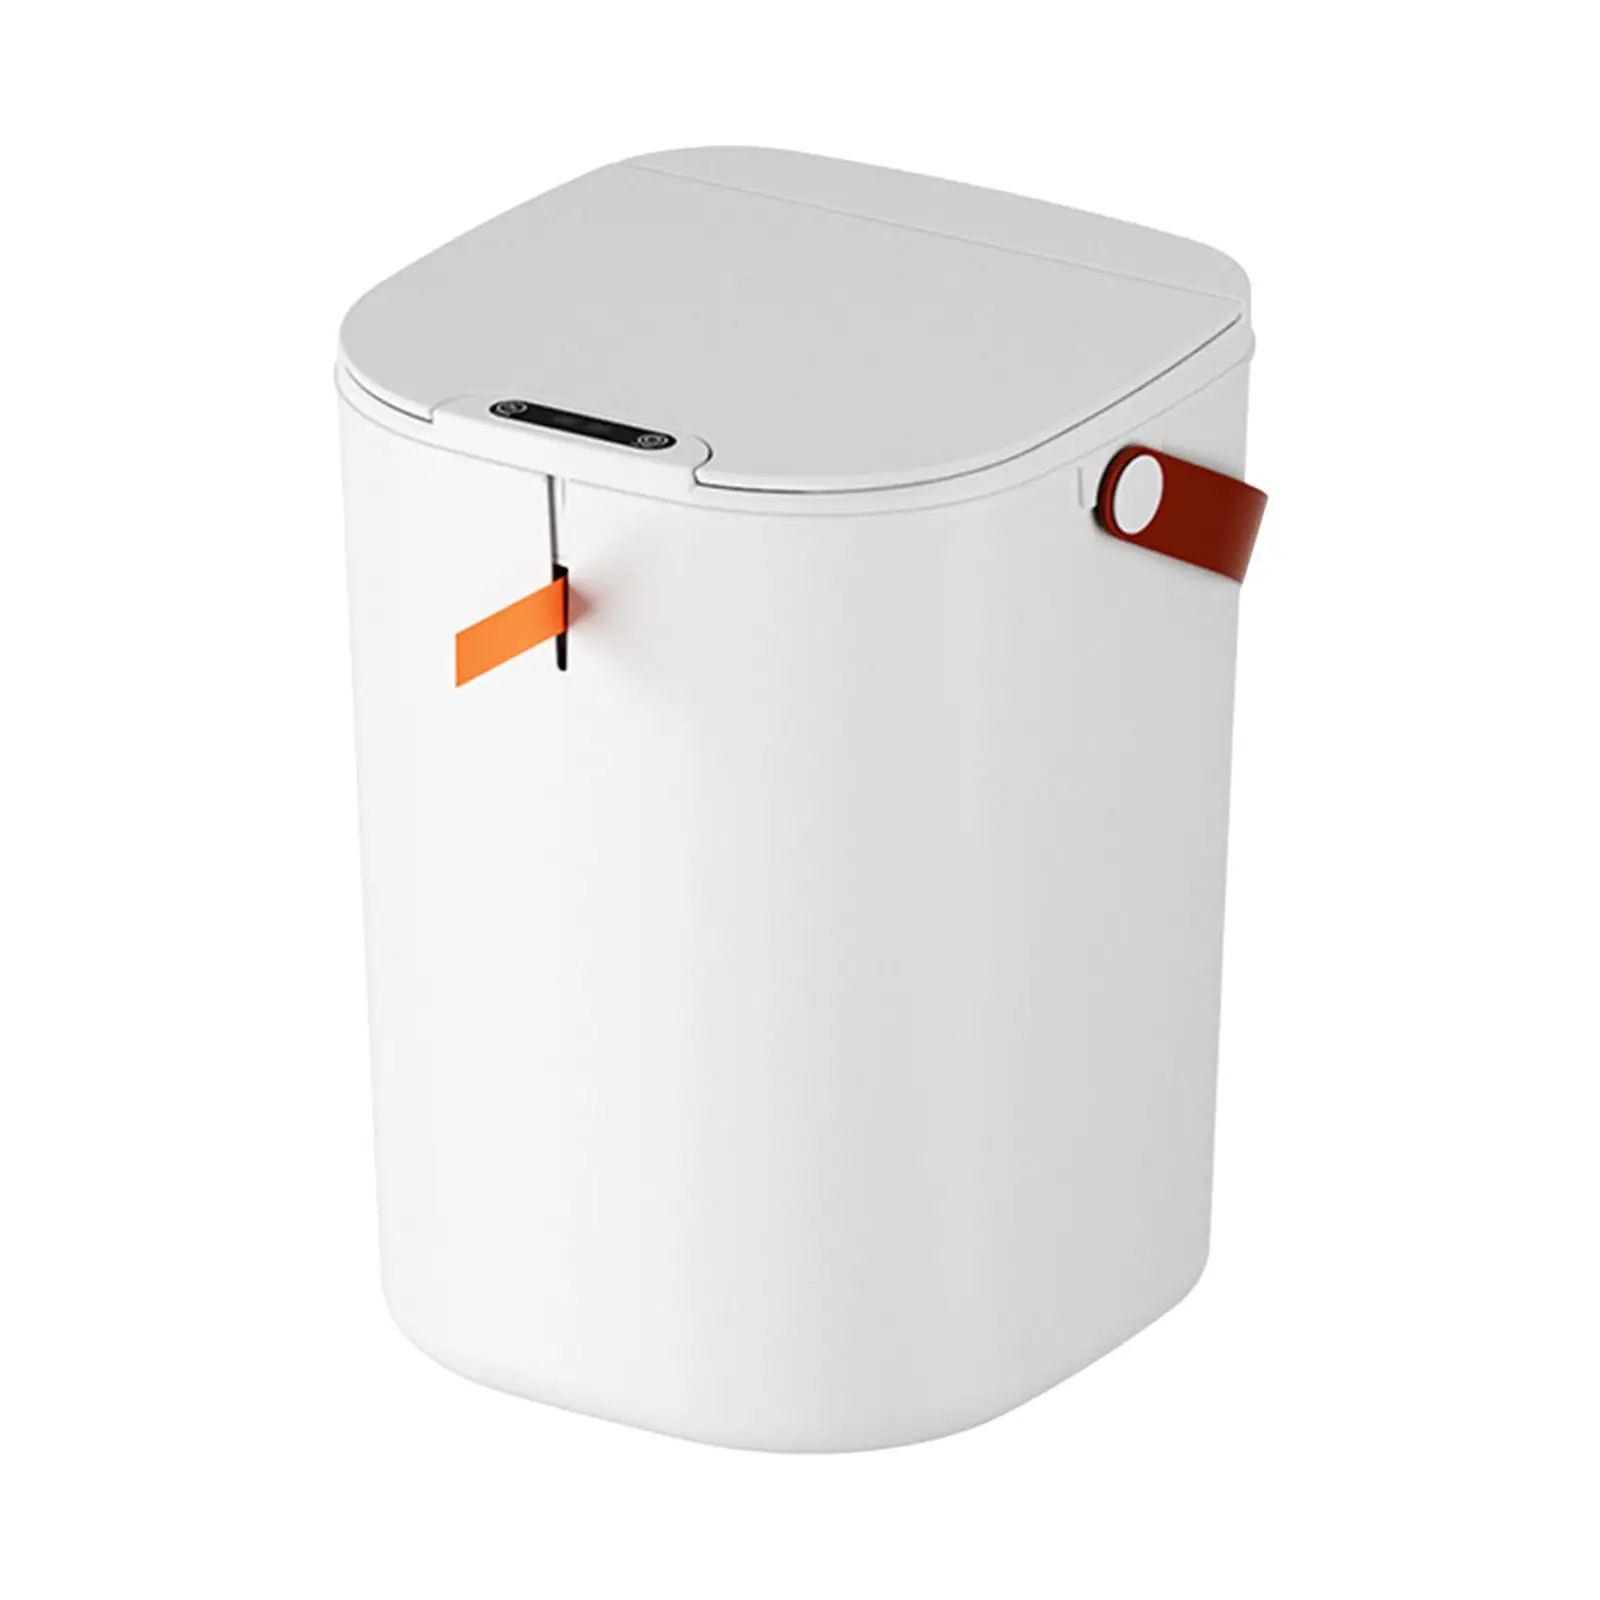 https://ae01.alicdn.com/kf/Sfcbcc2bfe5dd4aca90a9a9b5440bbdc7d/Automatic-Motion-Sensor-Garbage-Can-Large-Capacity-Space-Saving-Smart-Trash-Can-Touchless-Trash-Can-for.jpg